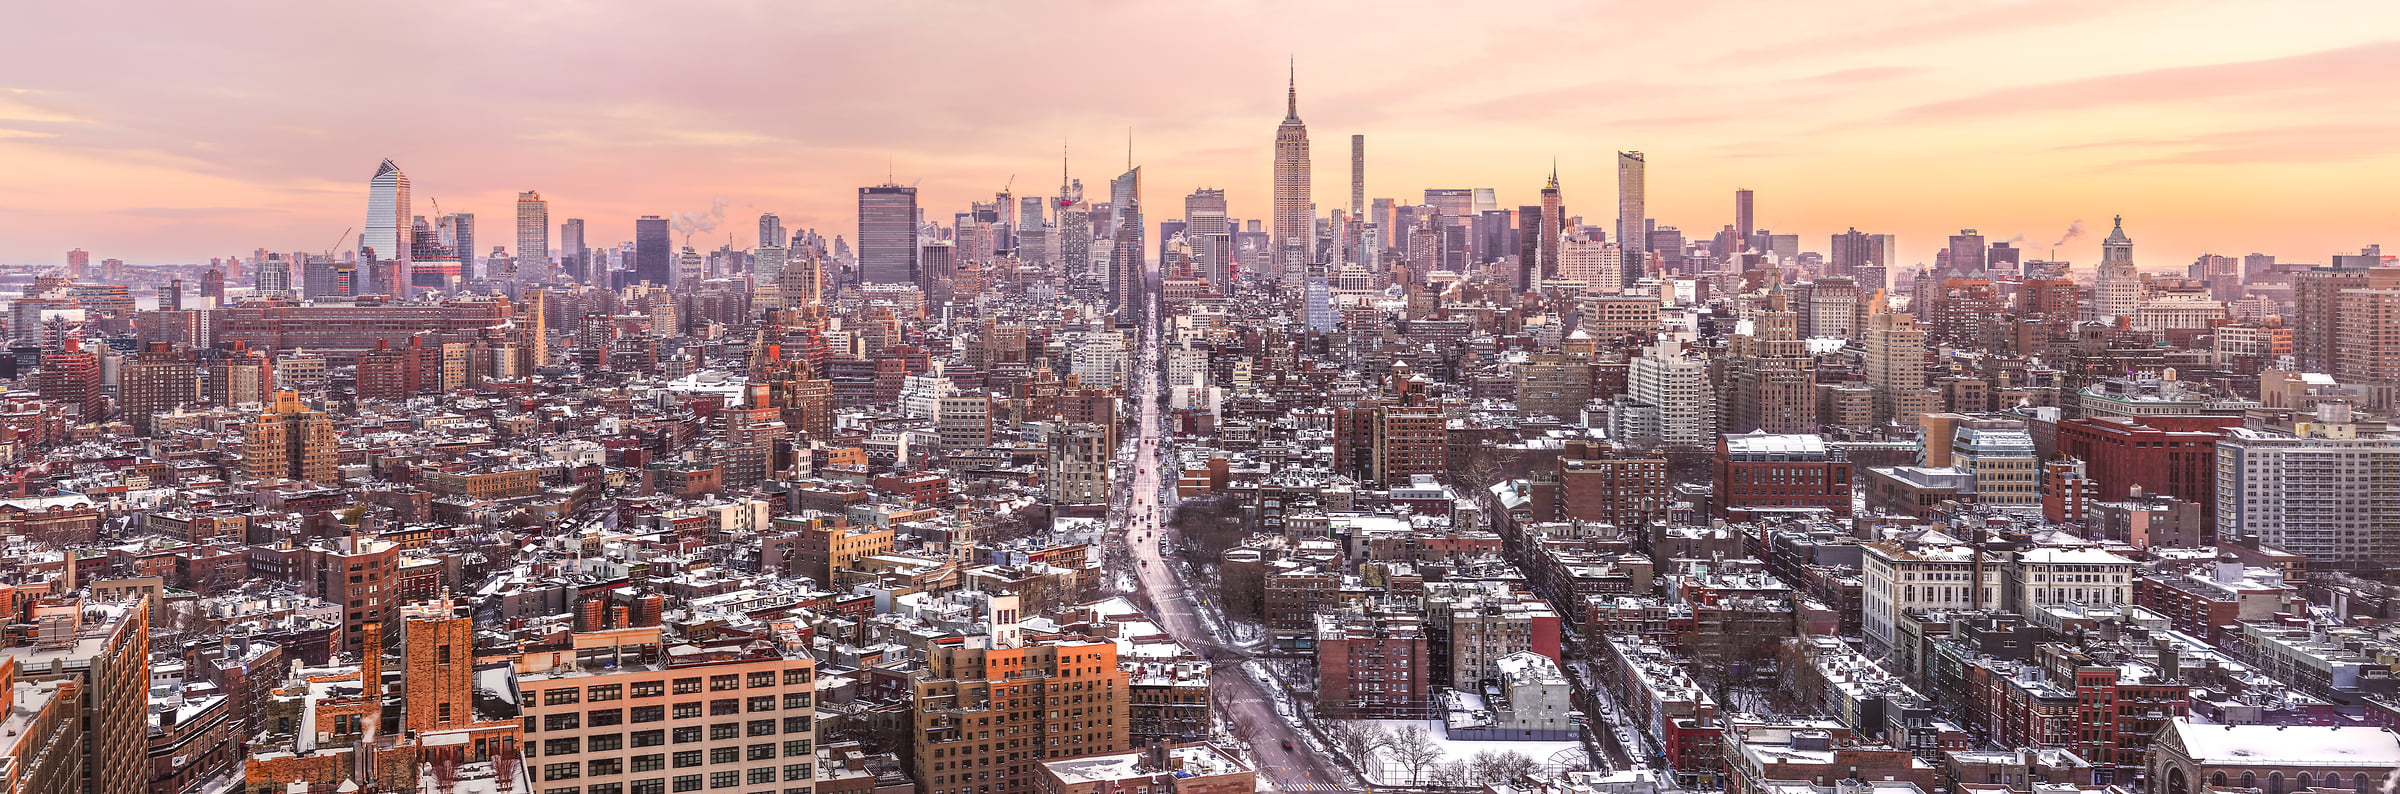 1,703 megapixels! A very high resolution, large-format VAST photo print of the NYC skyline in winter snow; cityscape sunrise fine art photo created by Dan Piech in New York City.